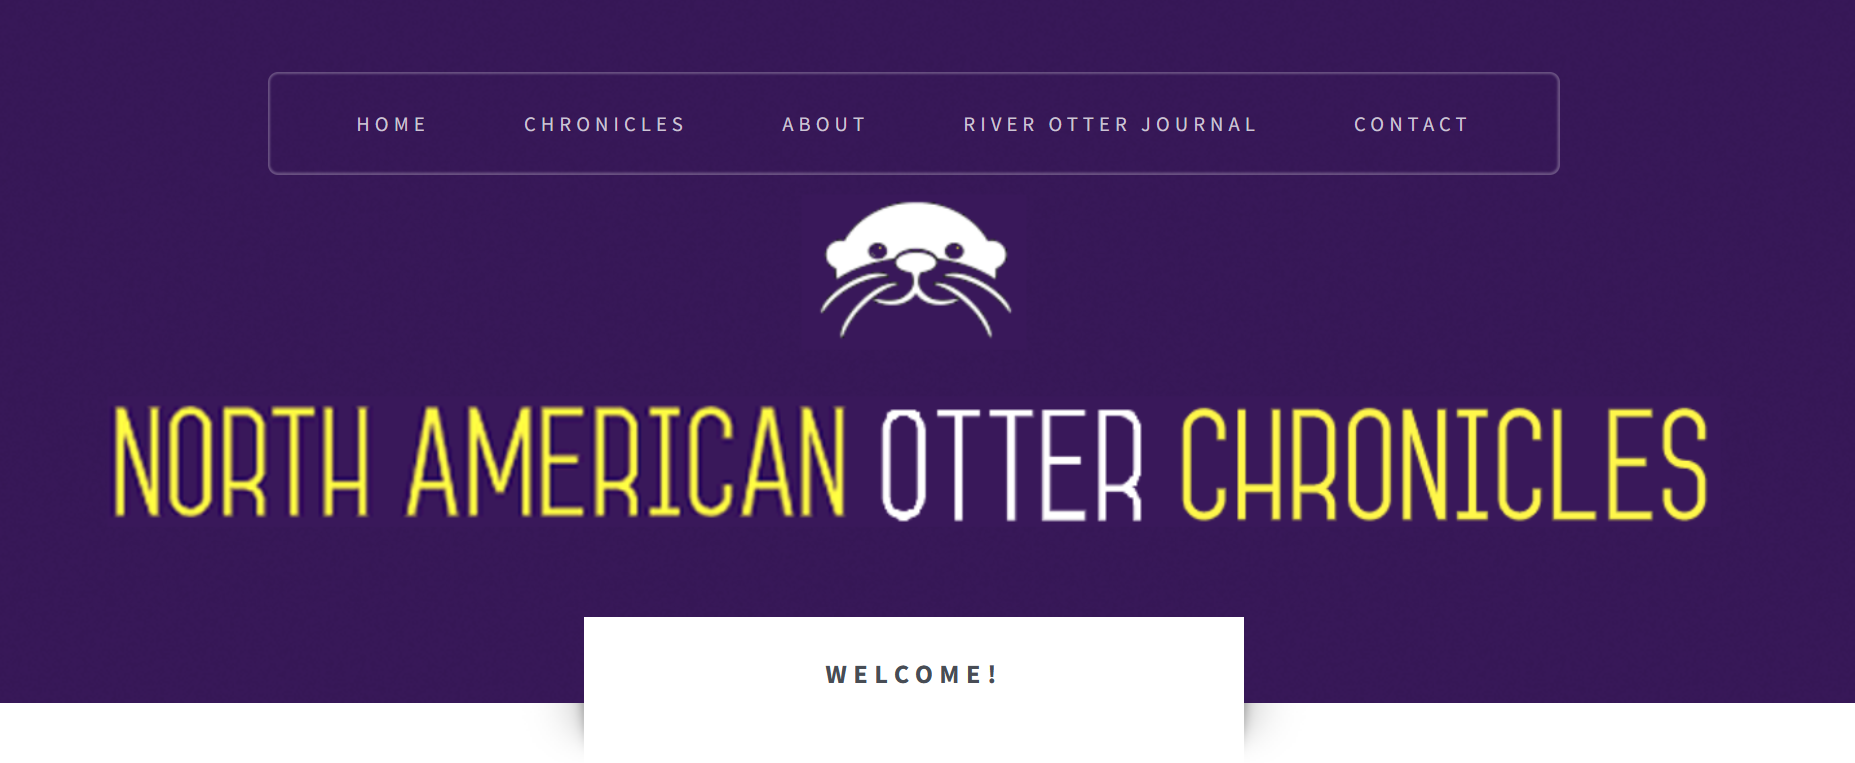 Header of the North American Otter Chronicles website